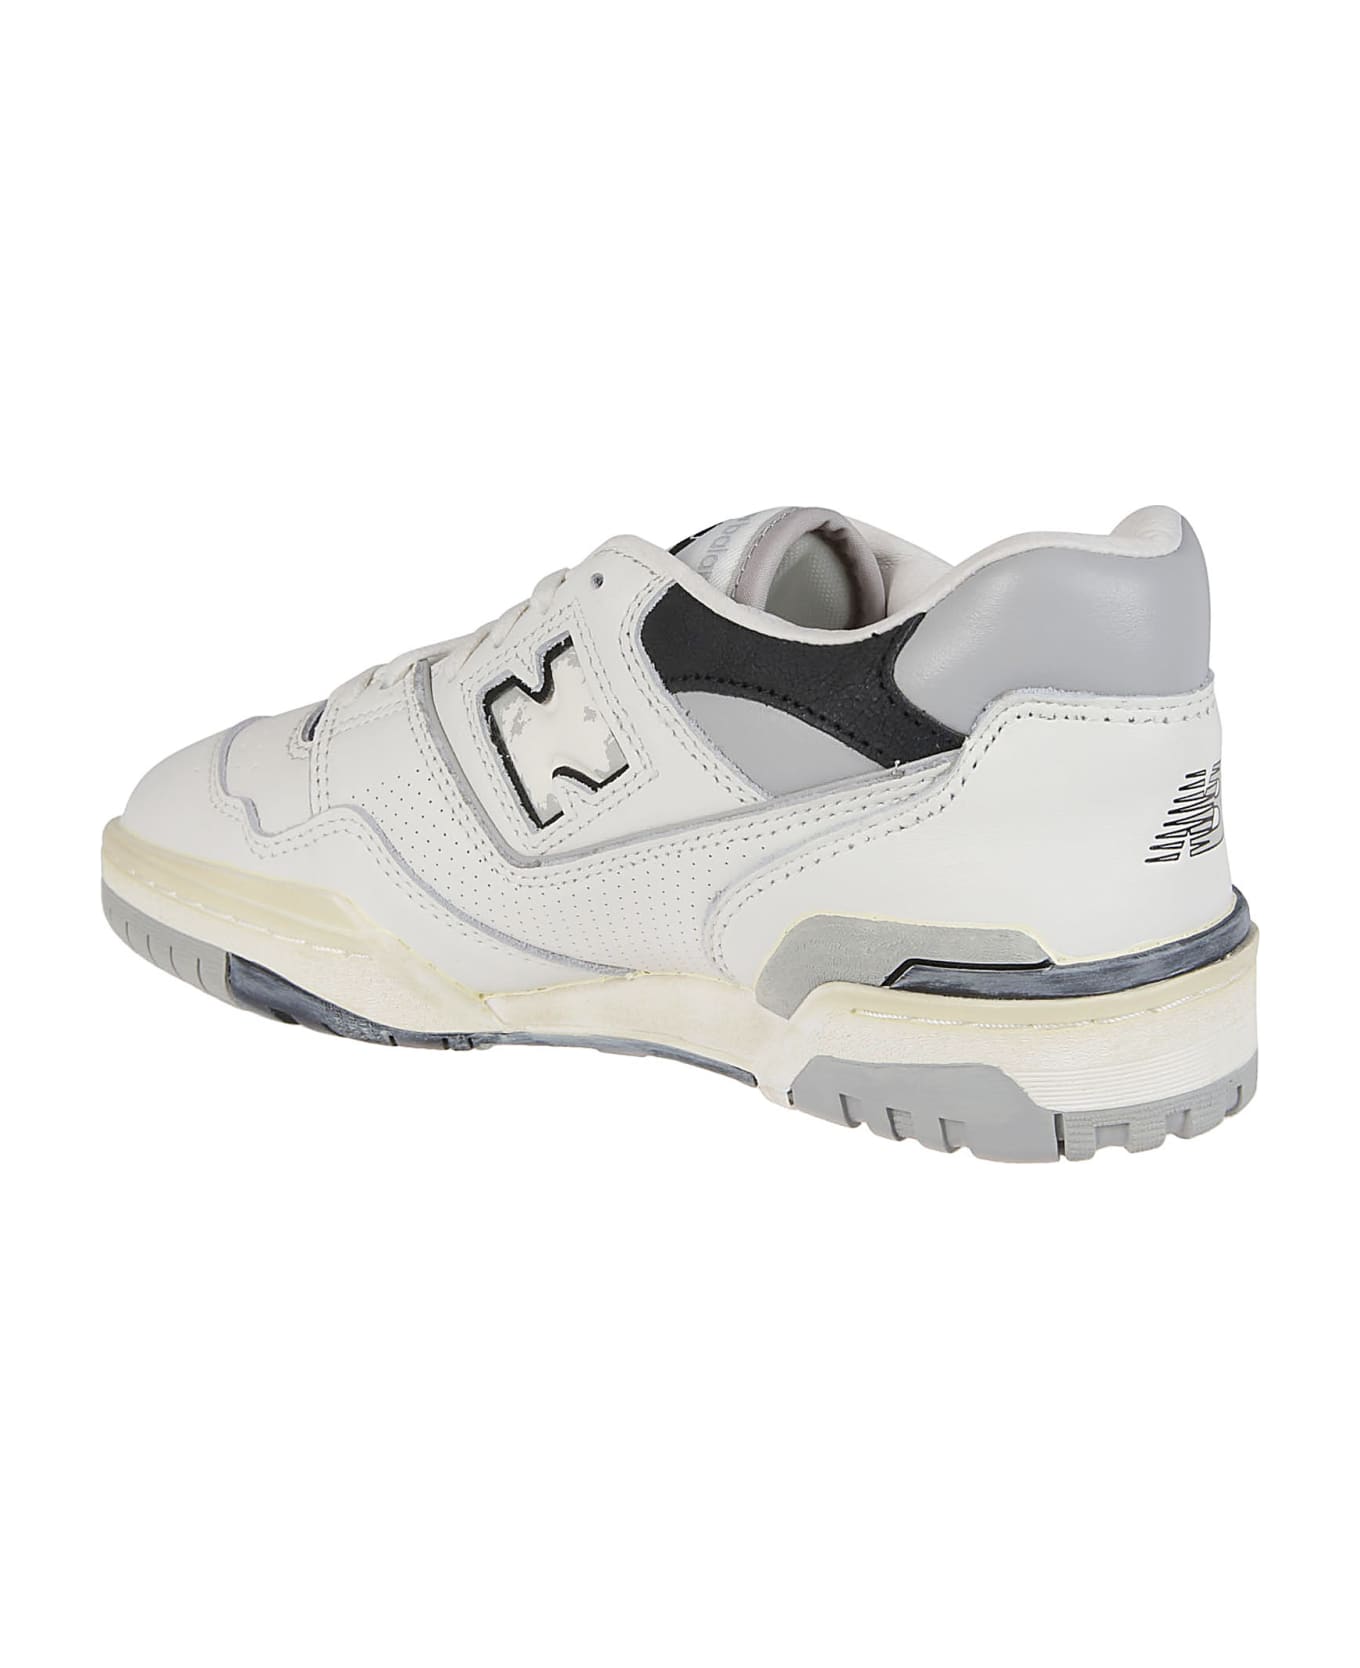 New Balance 550 Sneakers - Off White/grey